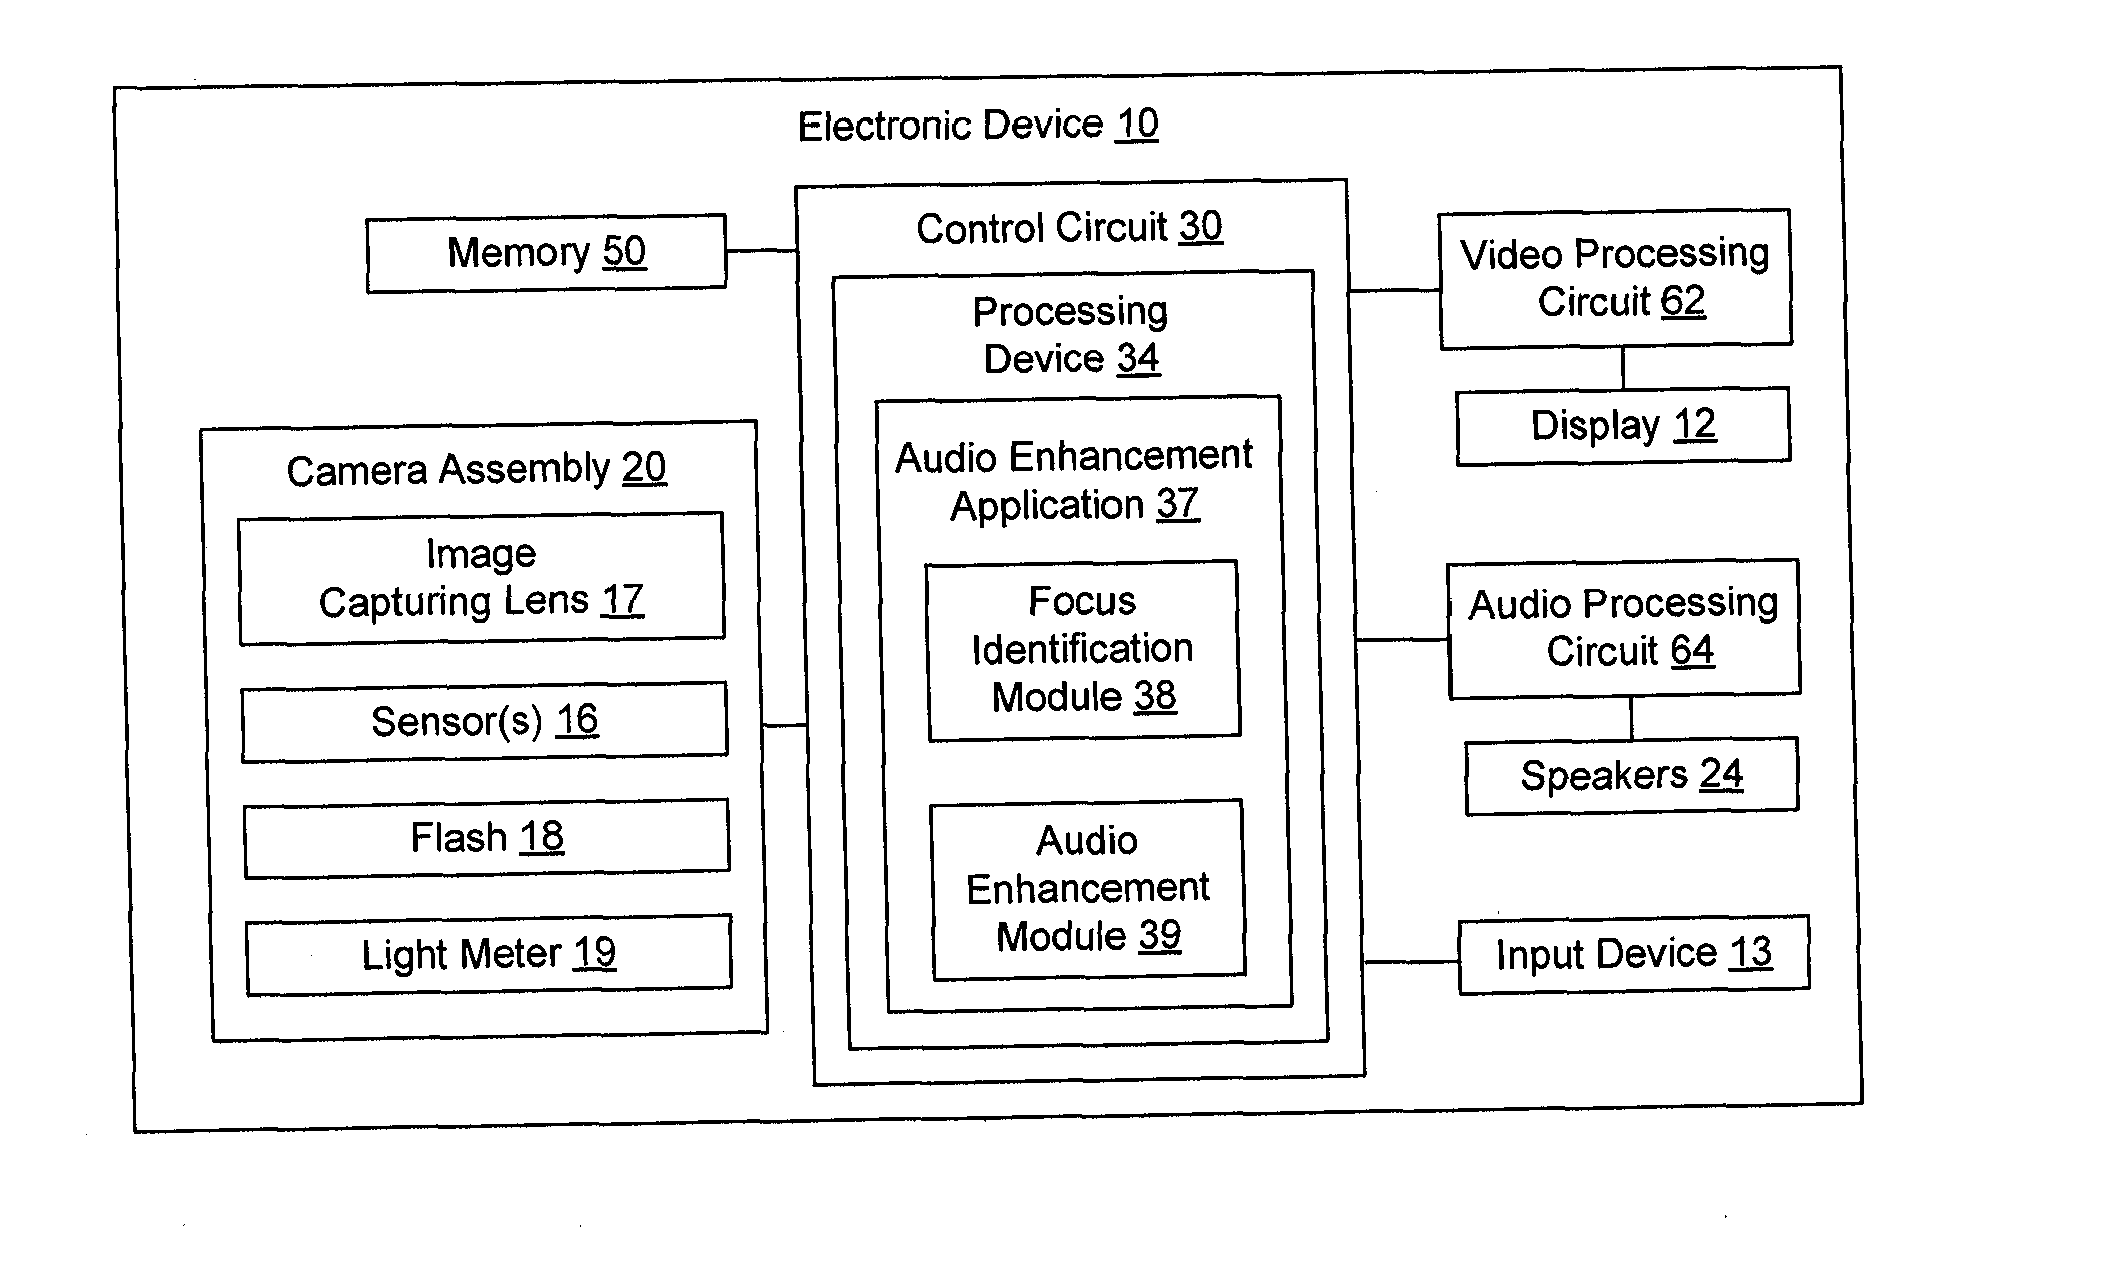 Method and system for providing an improved audio experience for viewers of video